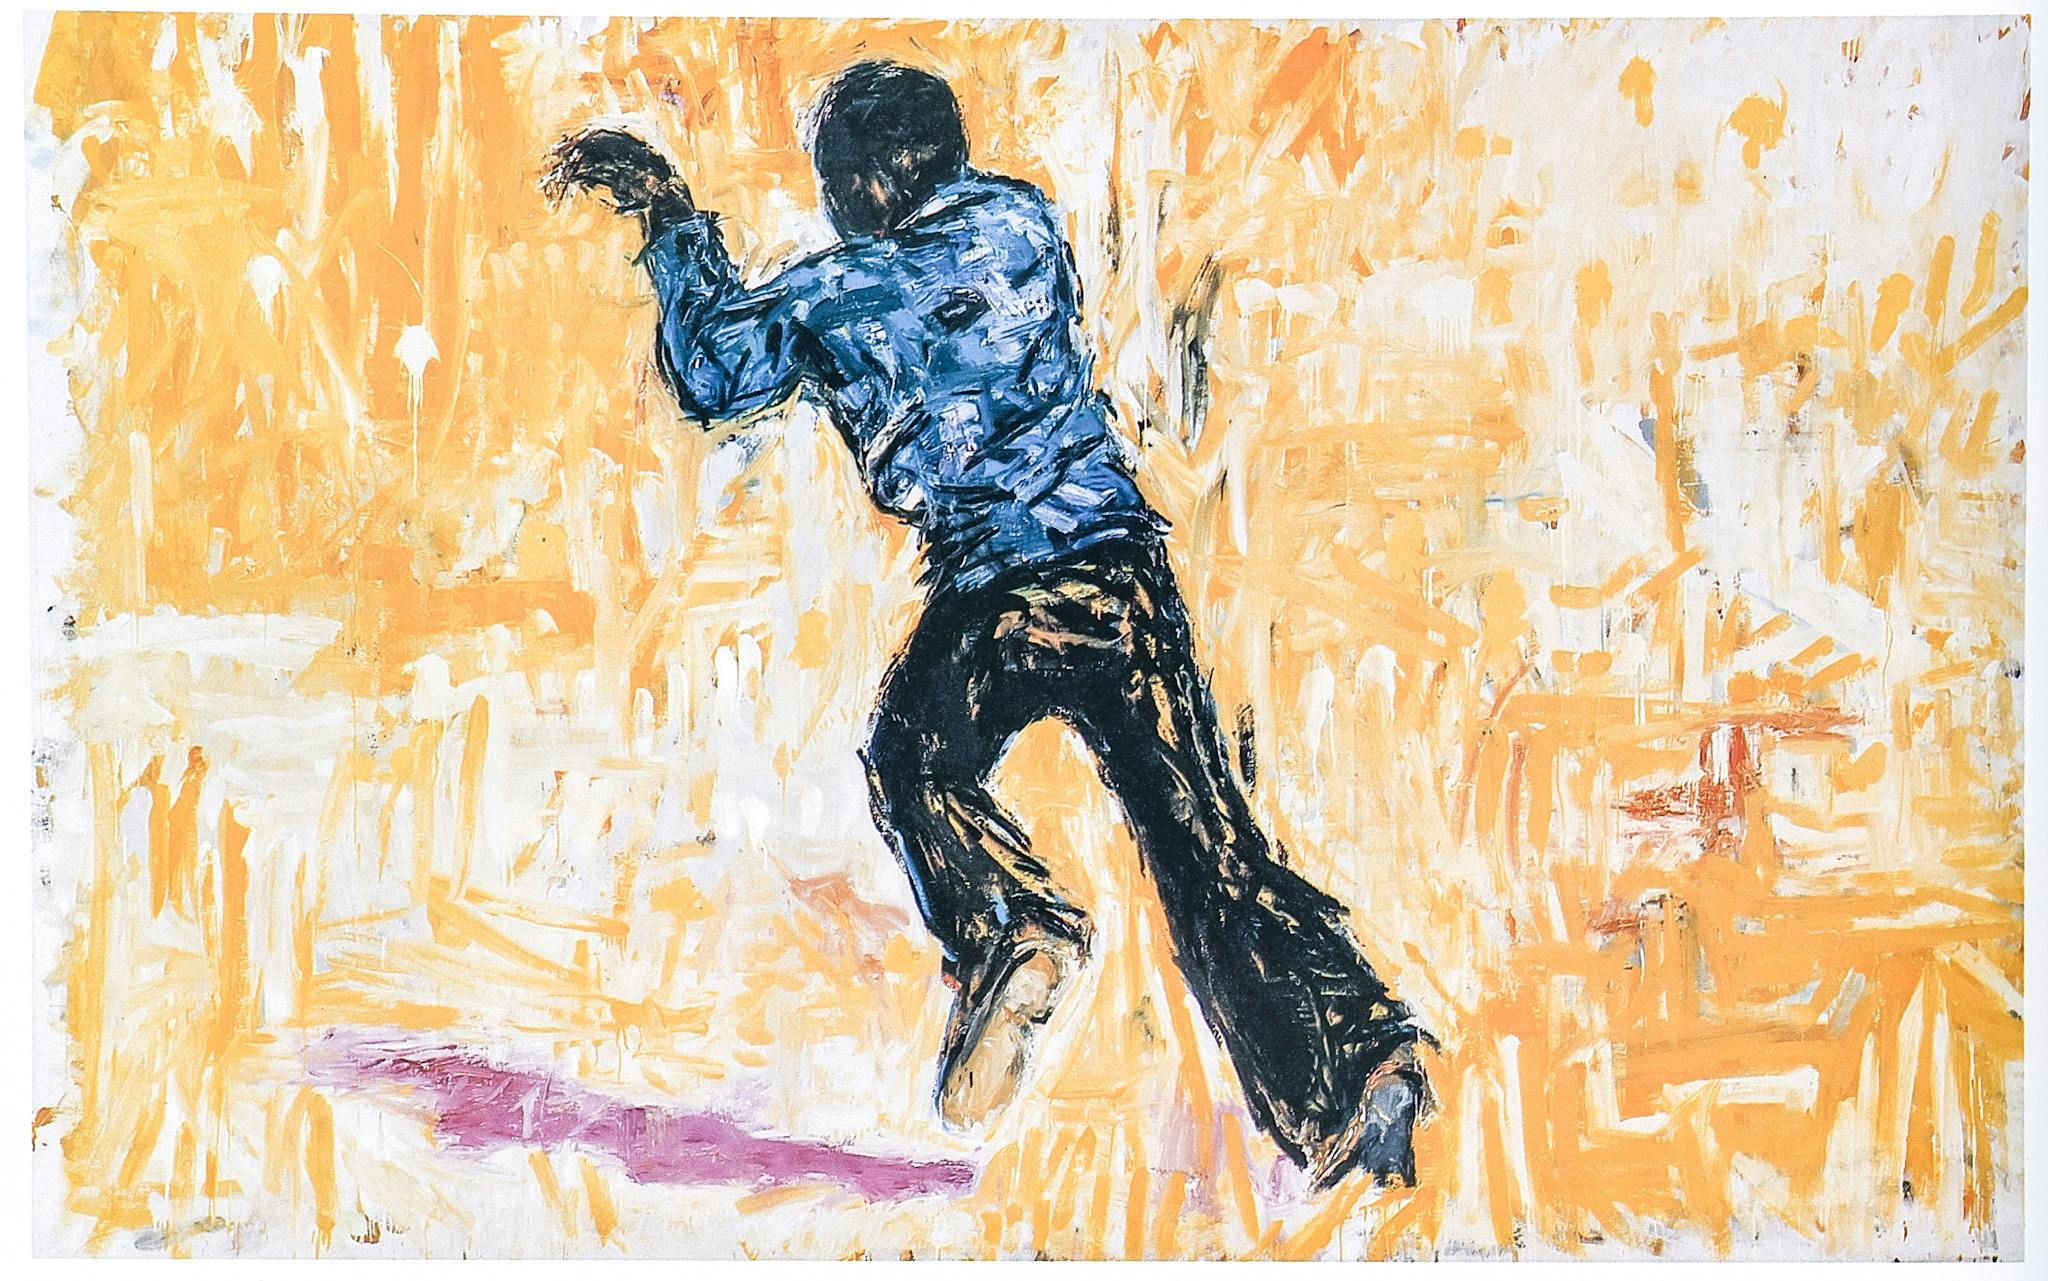 A gestural painting showing a dark figure in a blue jacket and flared black pants running with their arms raised in front of them. The background is made of yellow and white brush strokes.